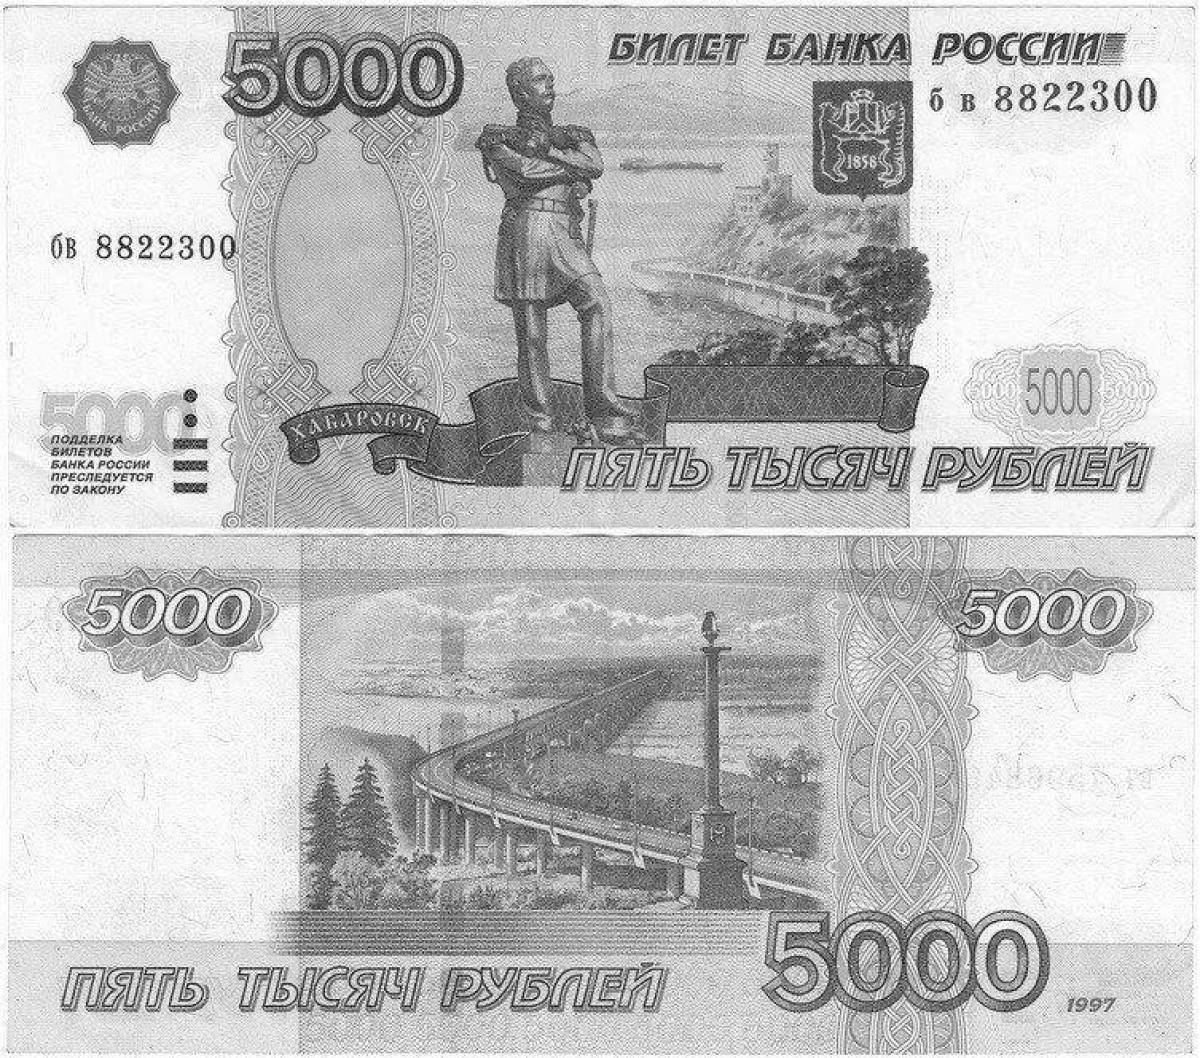 5000 rubles #8